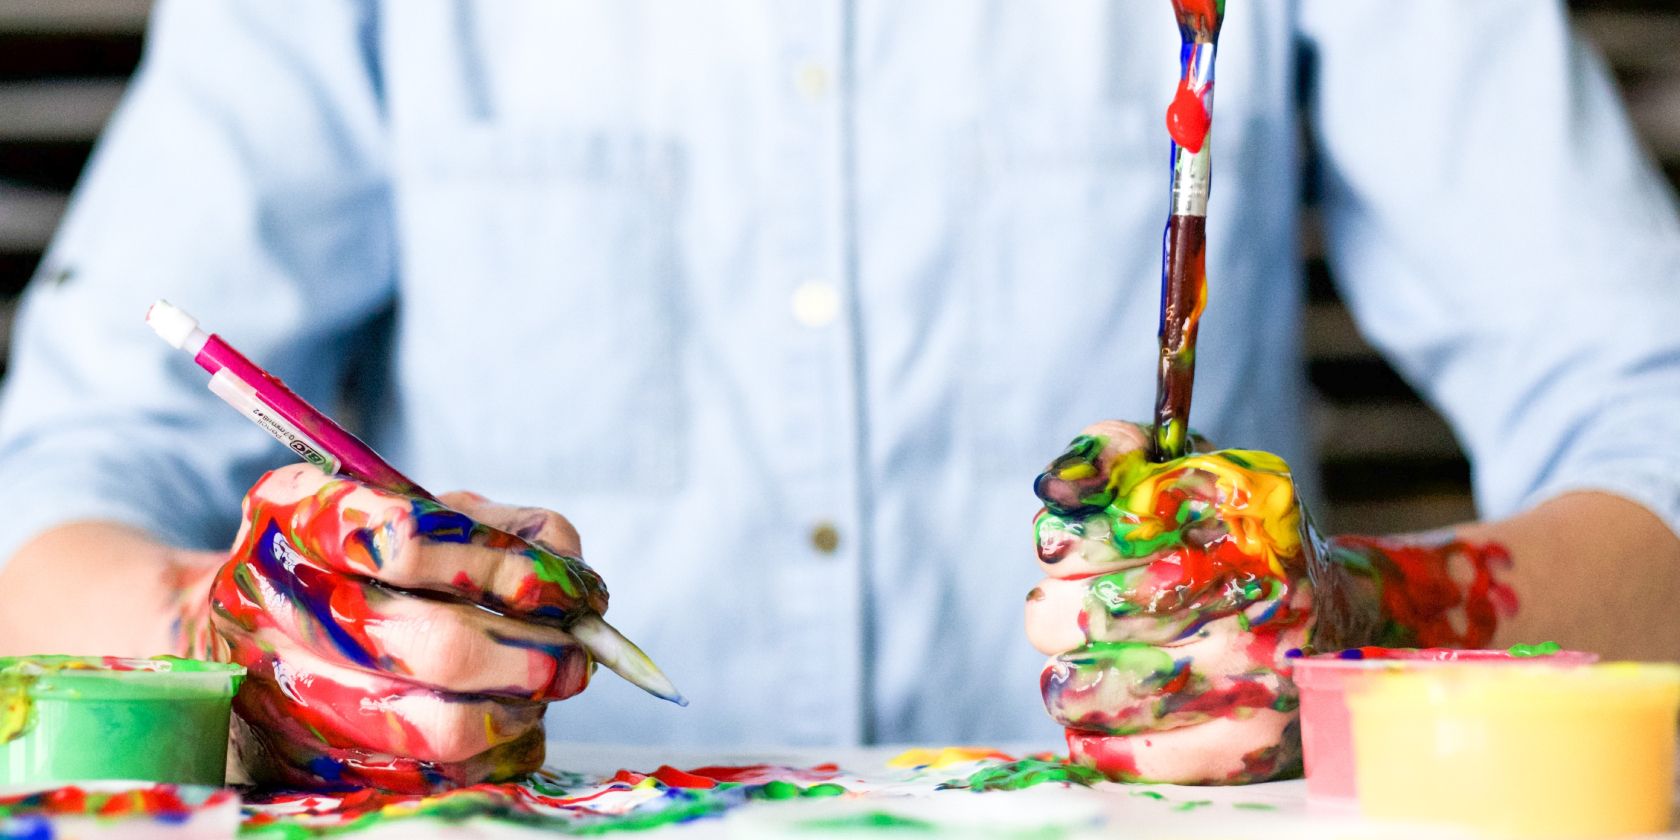 Person holding brushes with hands covered in paint